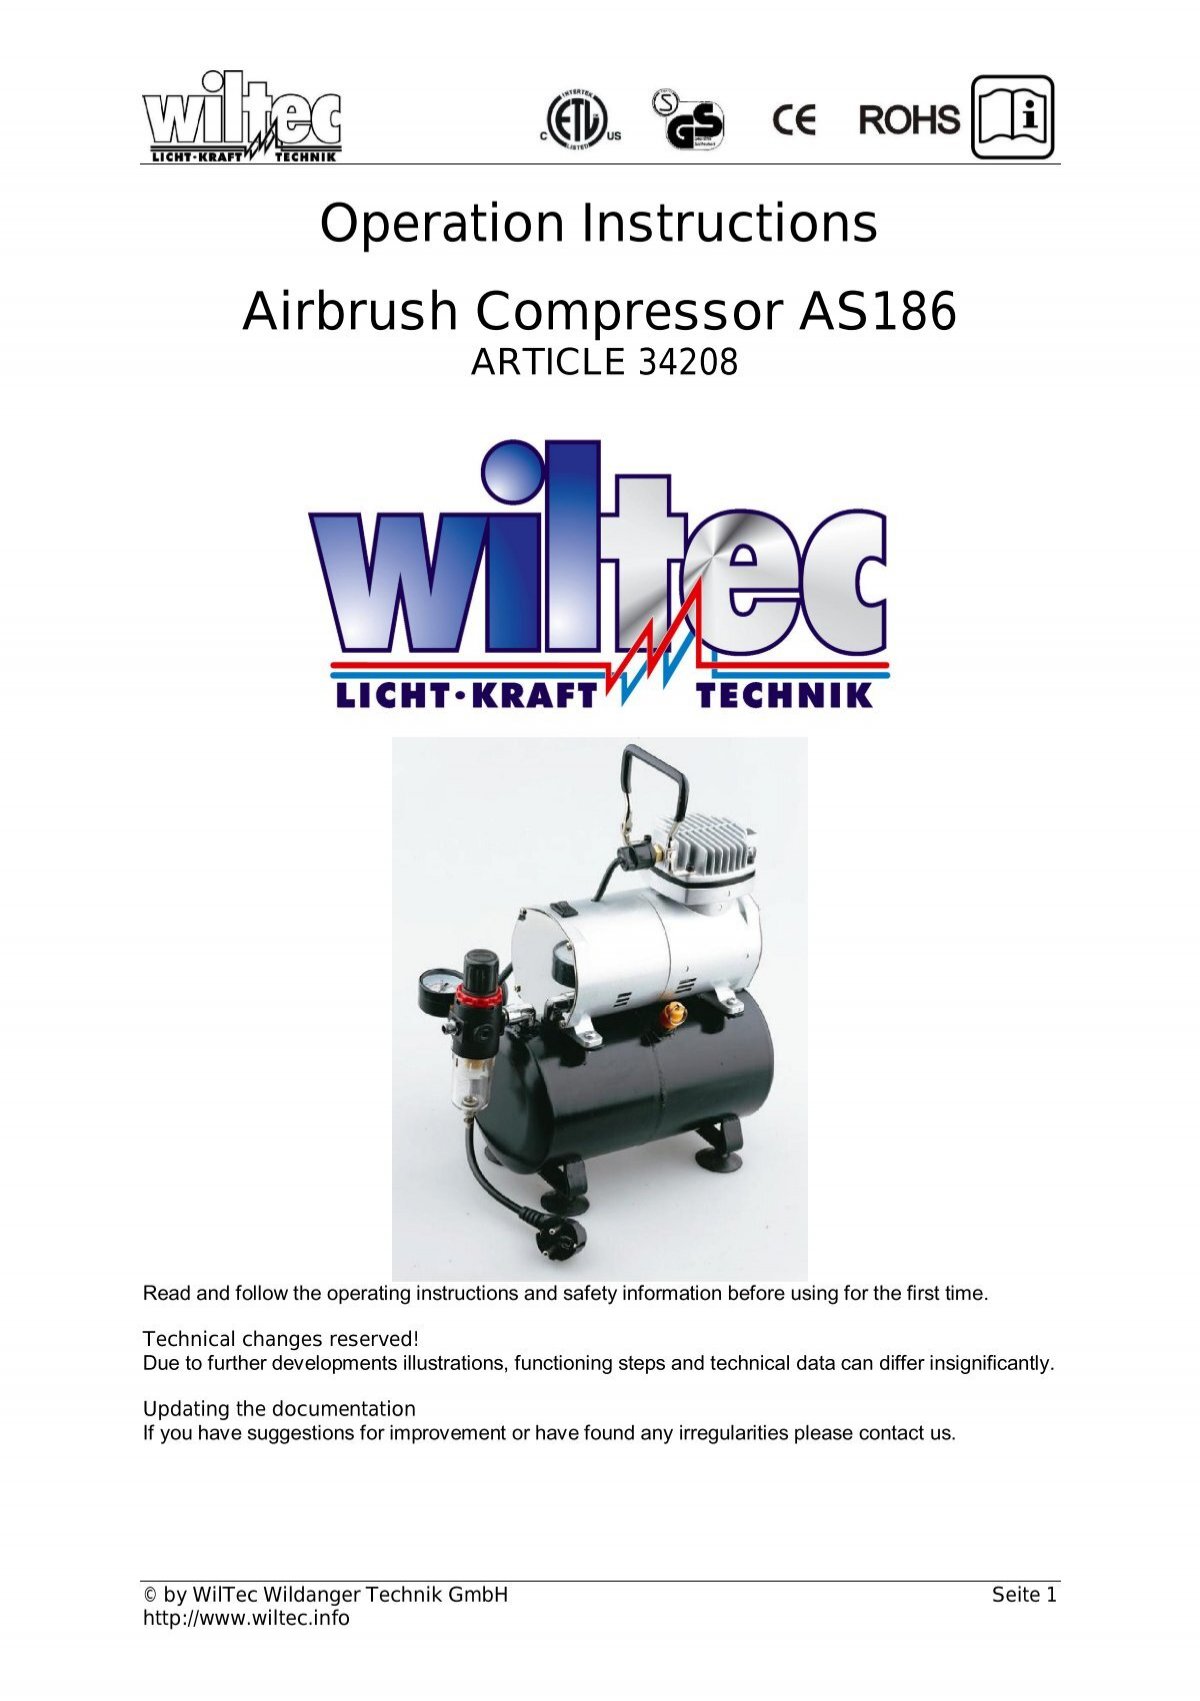 Operation Instructions Airbrush Compressor AS186 - WilTec